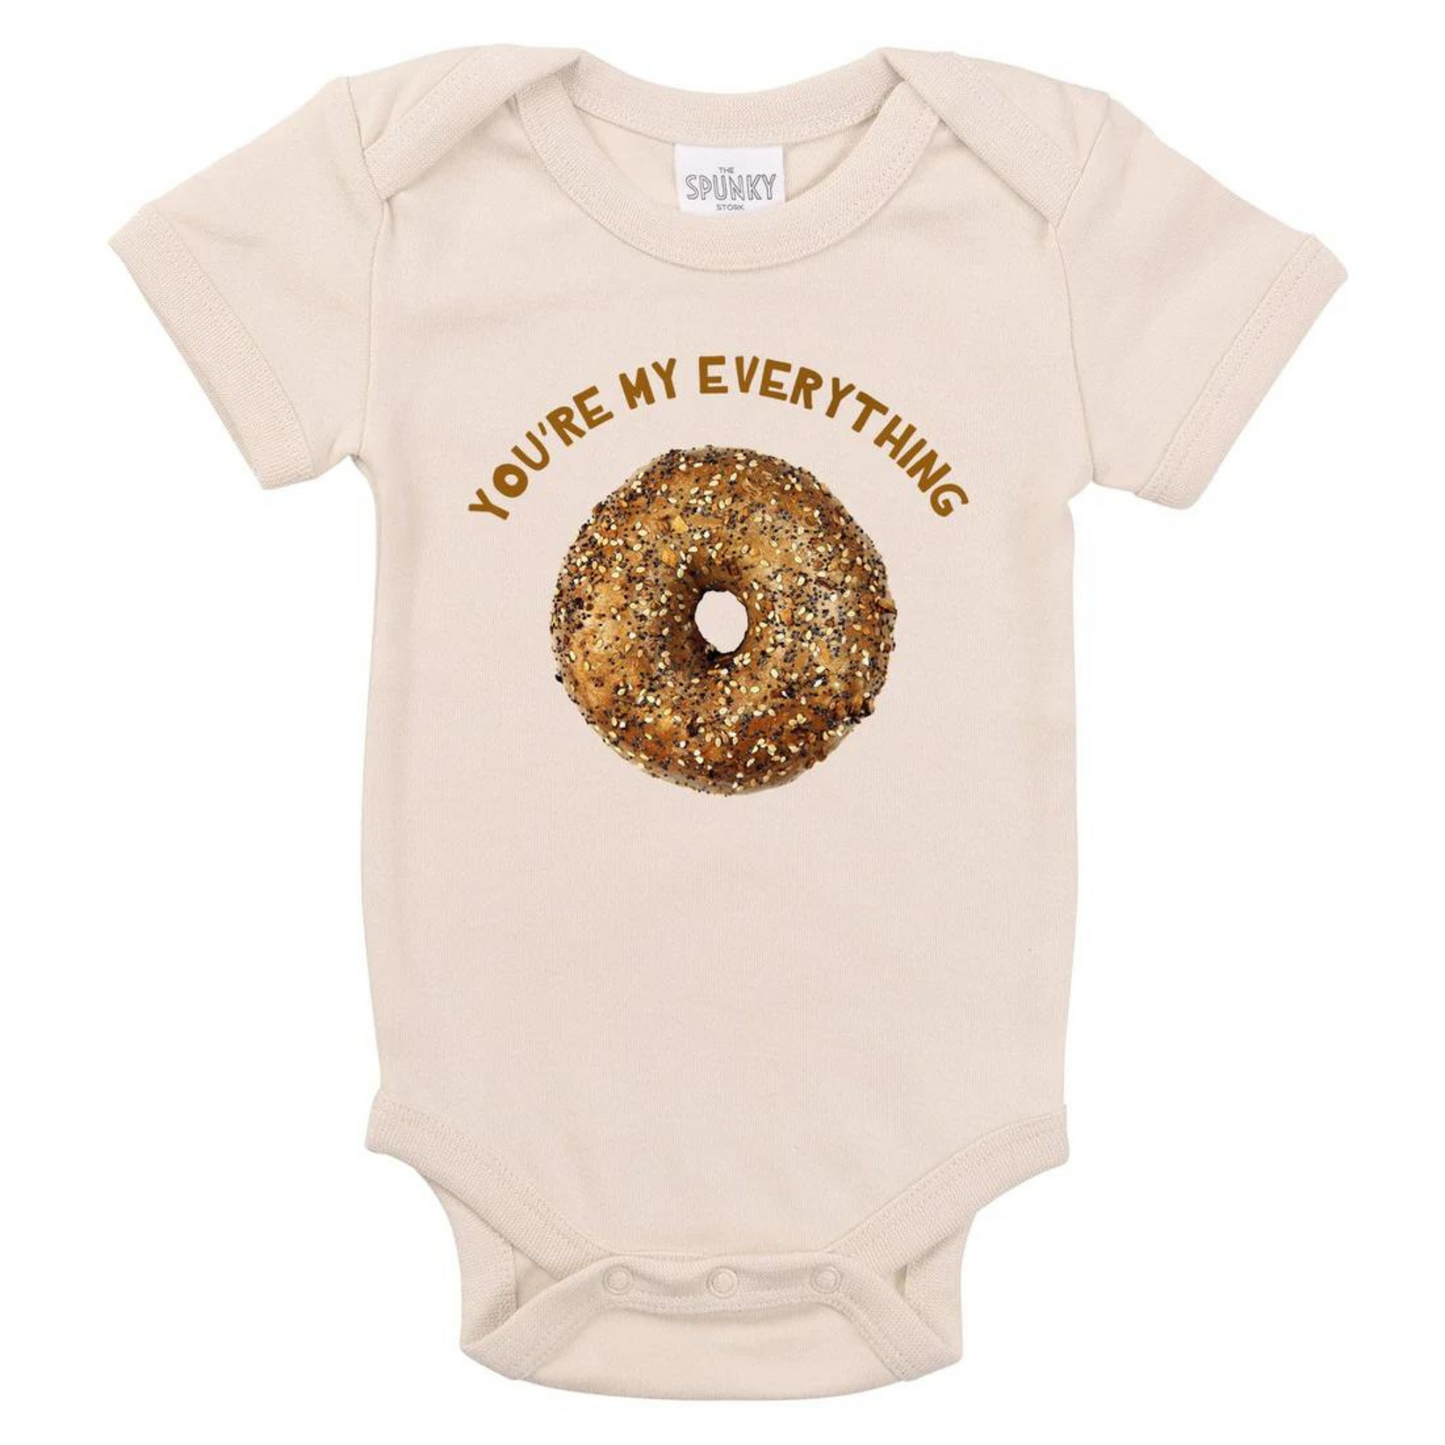 You're My Everything Bagel Bodysuit, Sand